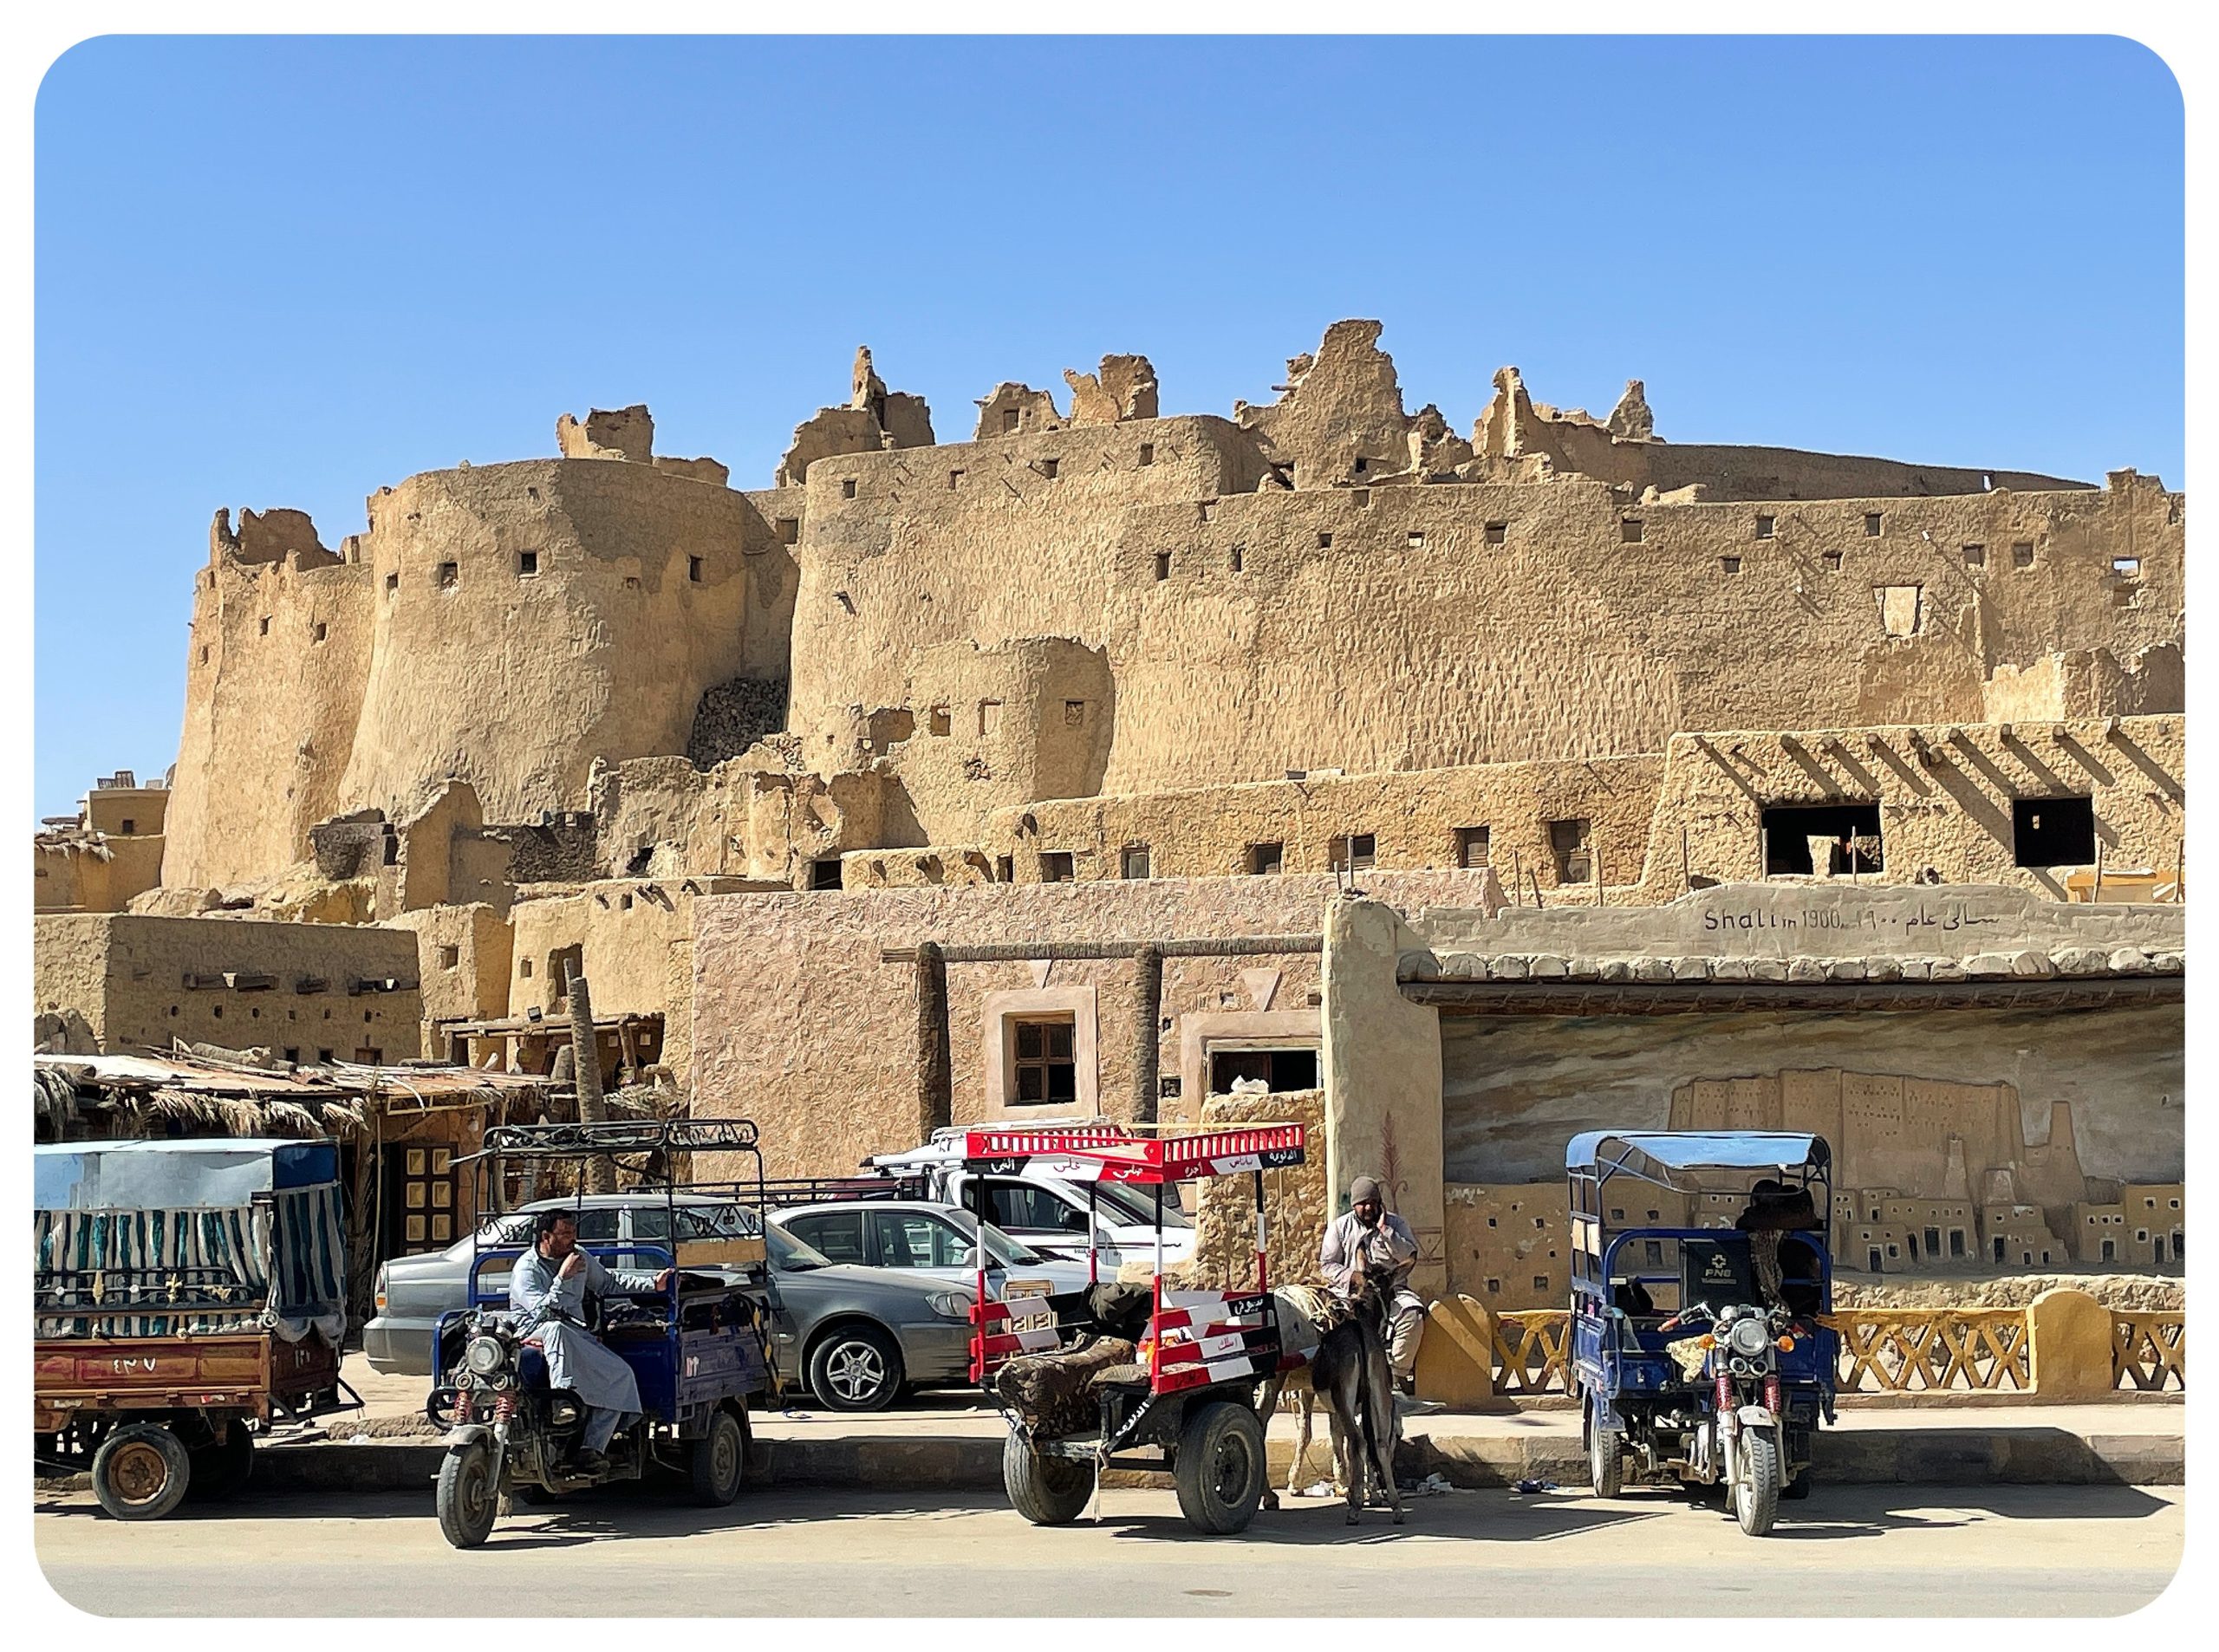 The 11 best things to do in Siwa, Egypt